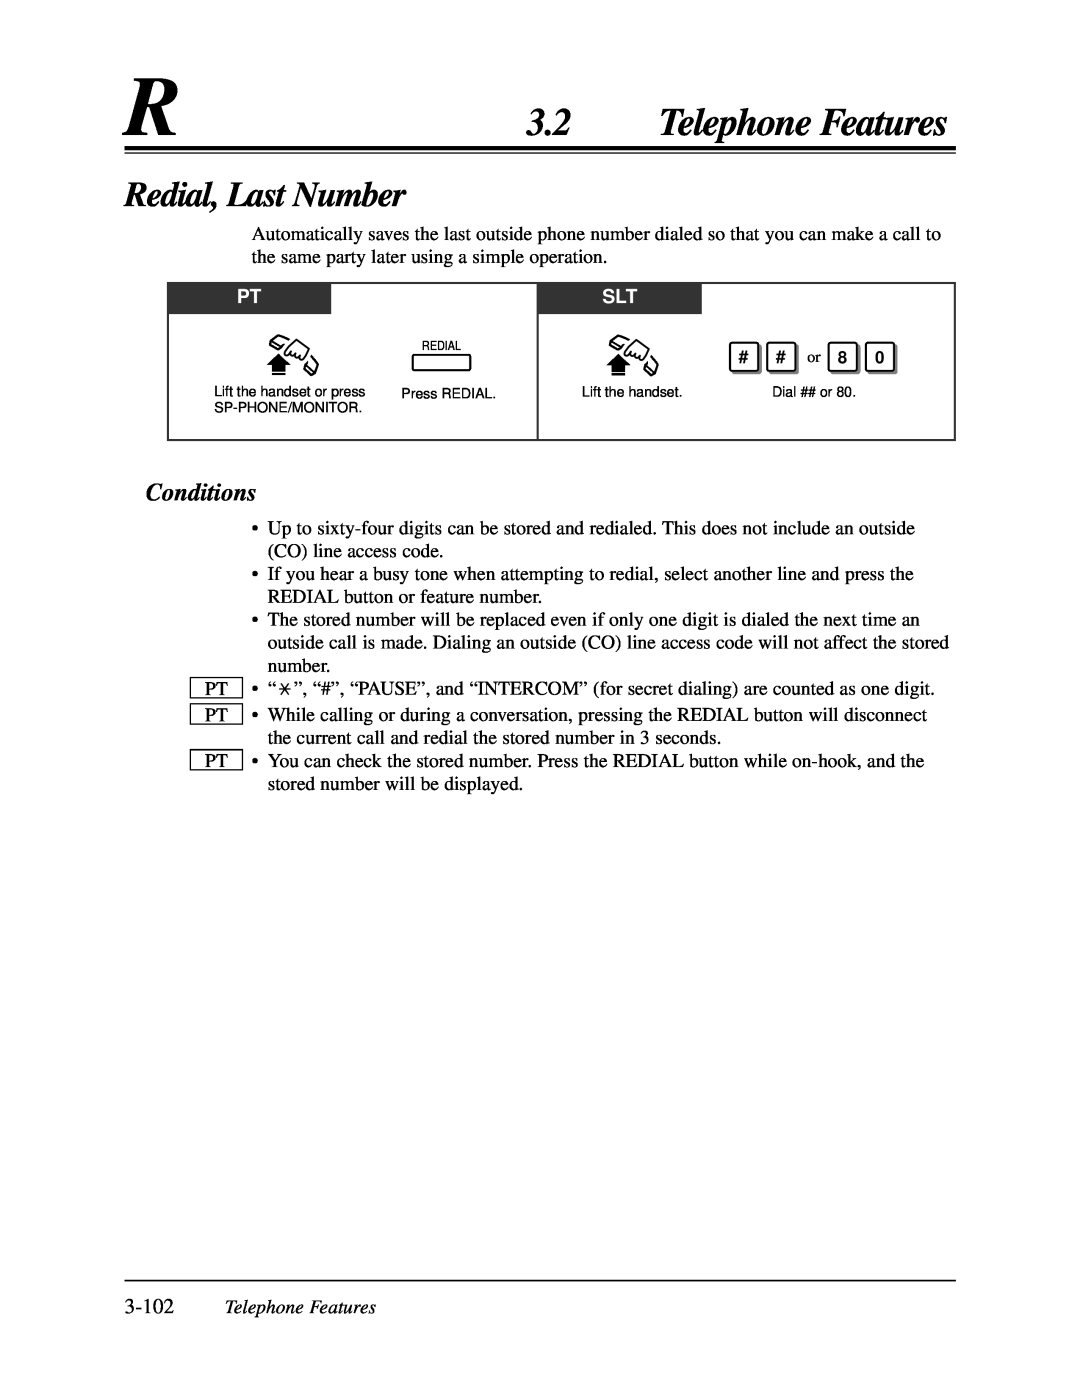 Panasonic KX-TA624 user manual Redial, Last Number, 3.2Telephone Features, Conditions 